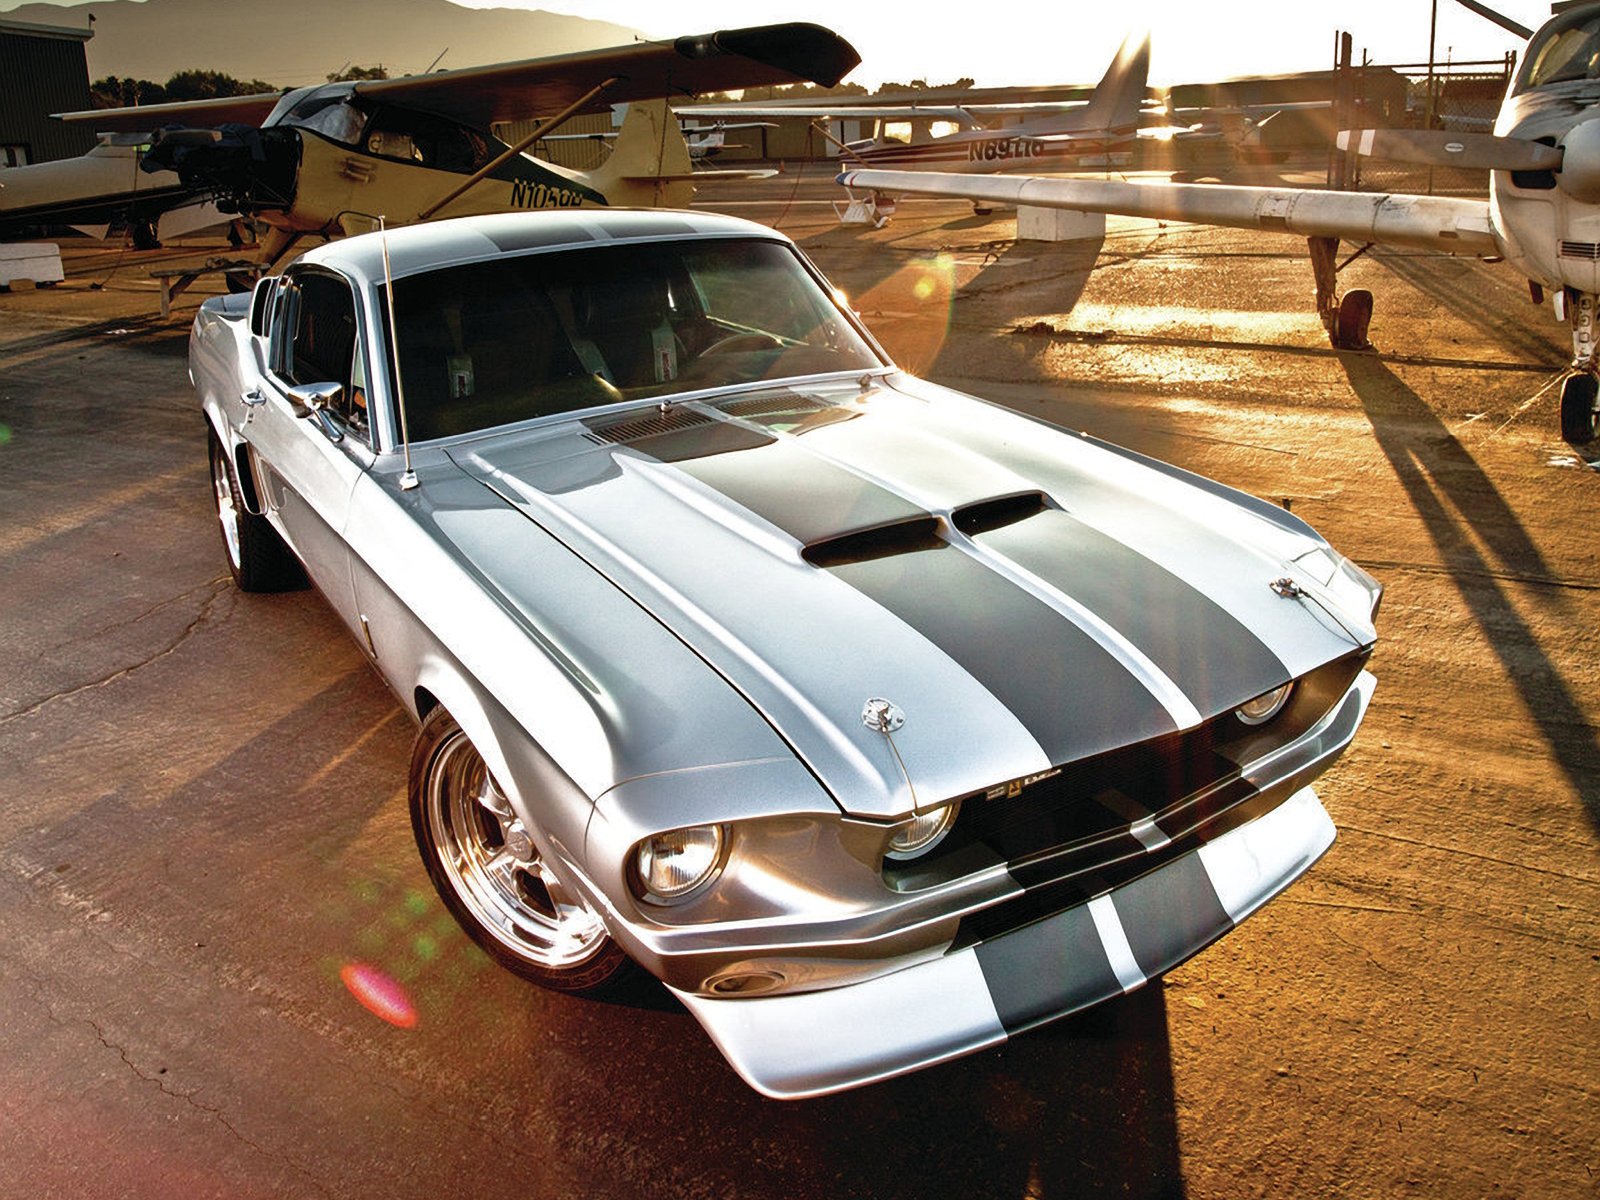 1968, Ford, Mustang, Fastback, Shelby, Gt, 350, Streetrod, Street, Rod, Hot, Supercar, Usa, 1600x1220 03 Wallpaper